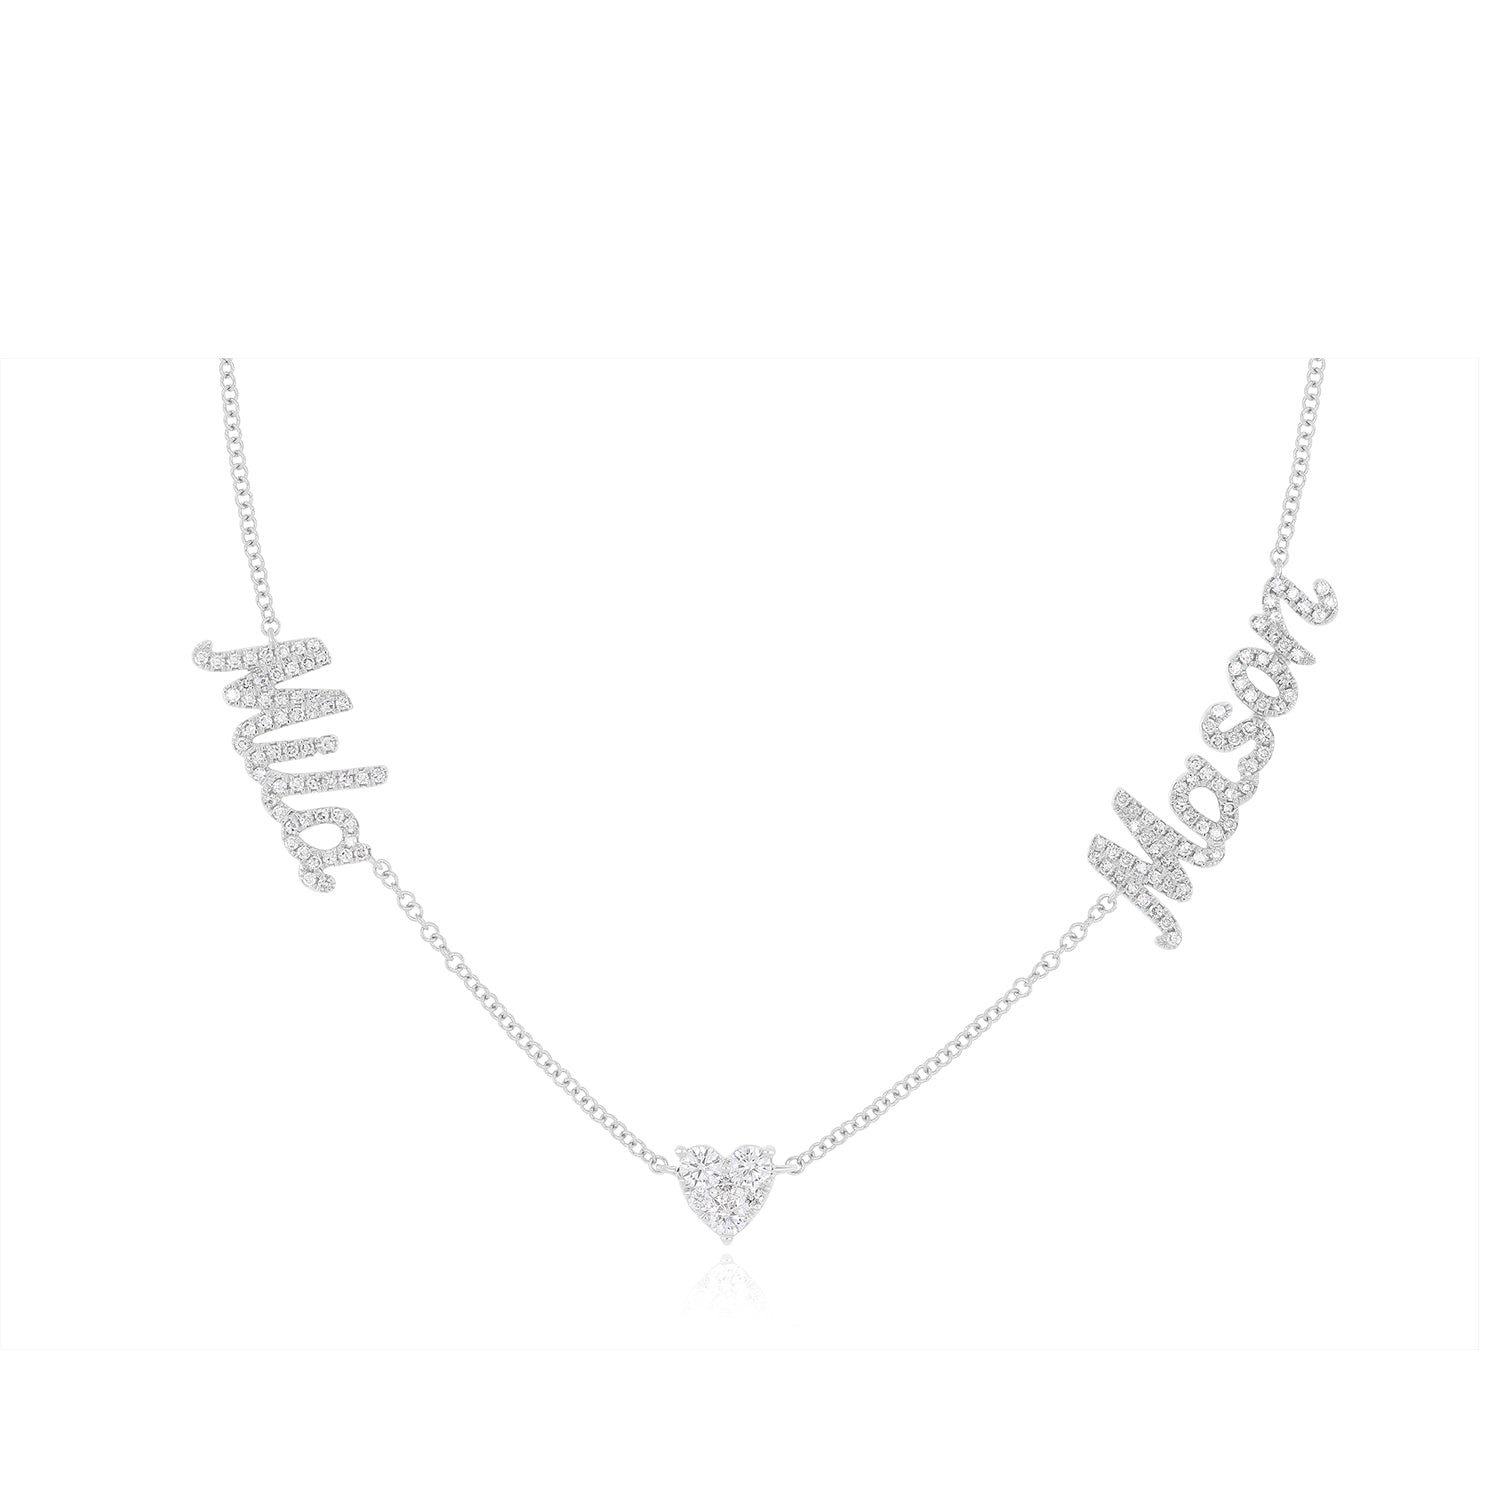 Full Cut Heart Double Diamond Script Name Necklace with names Mila and Mason with heart in the middle of necklace in 14k white gold